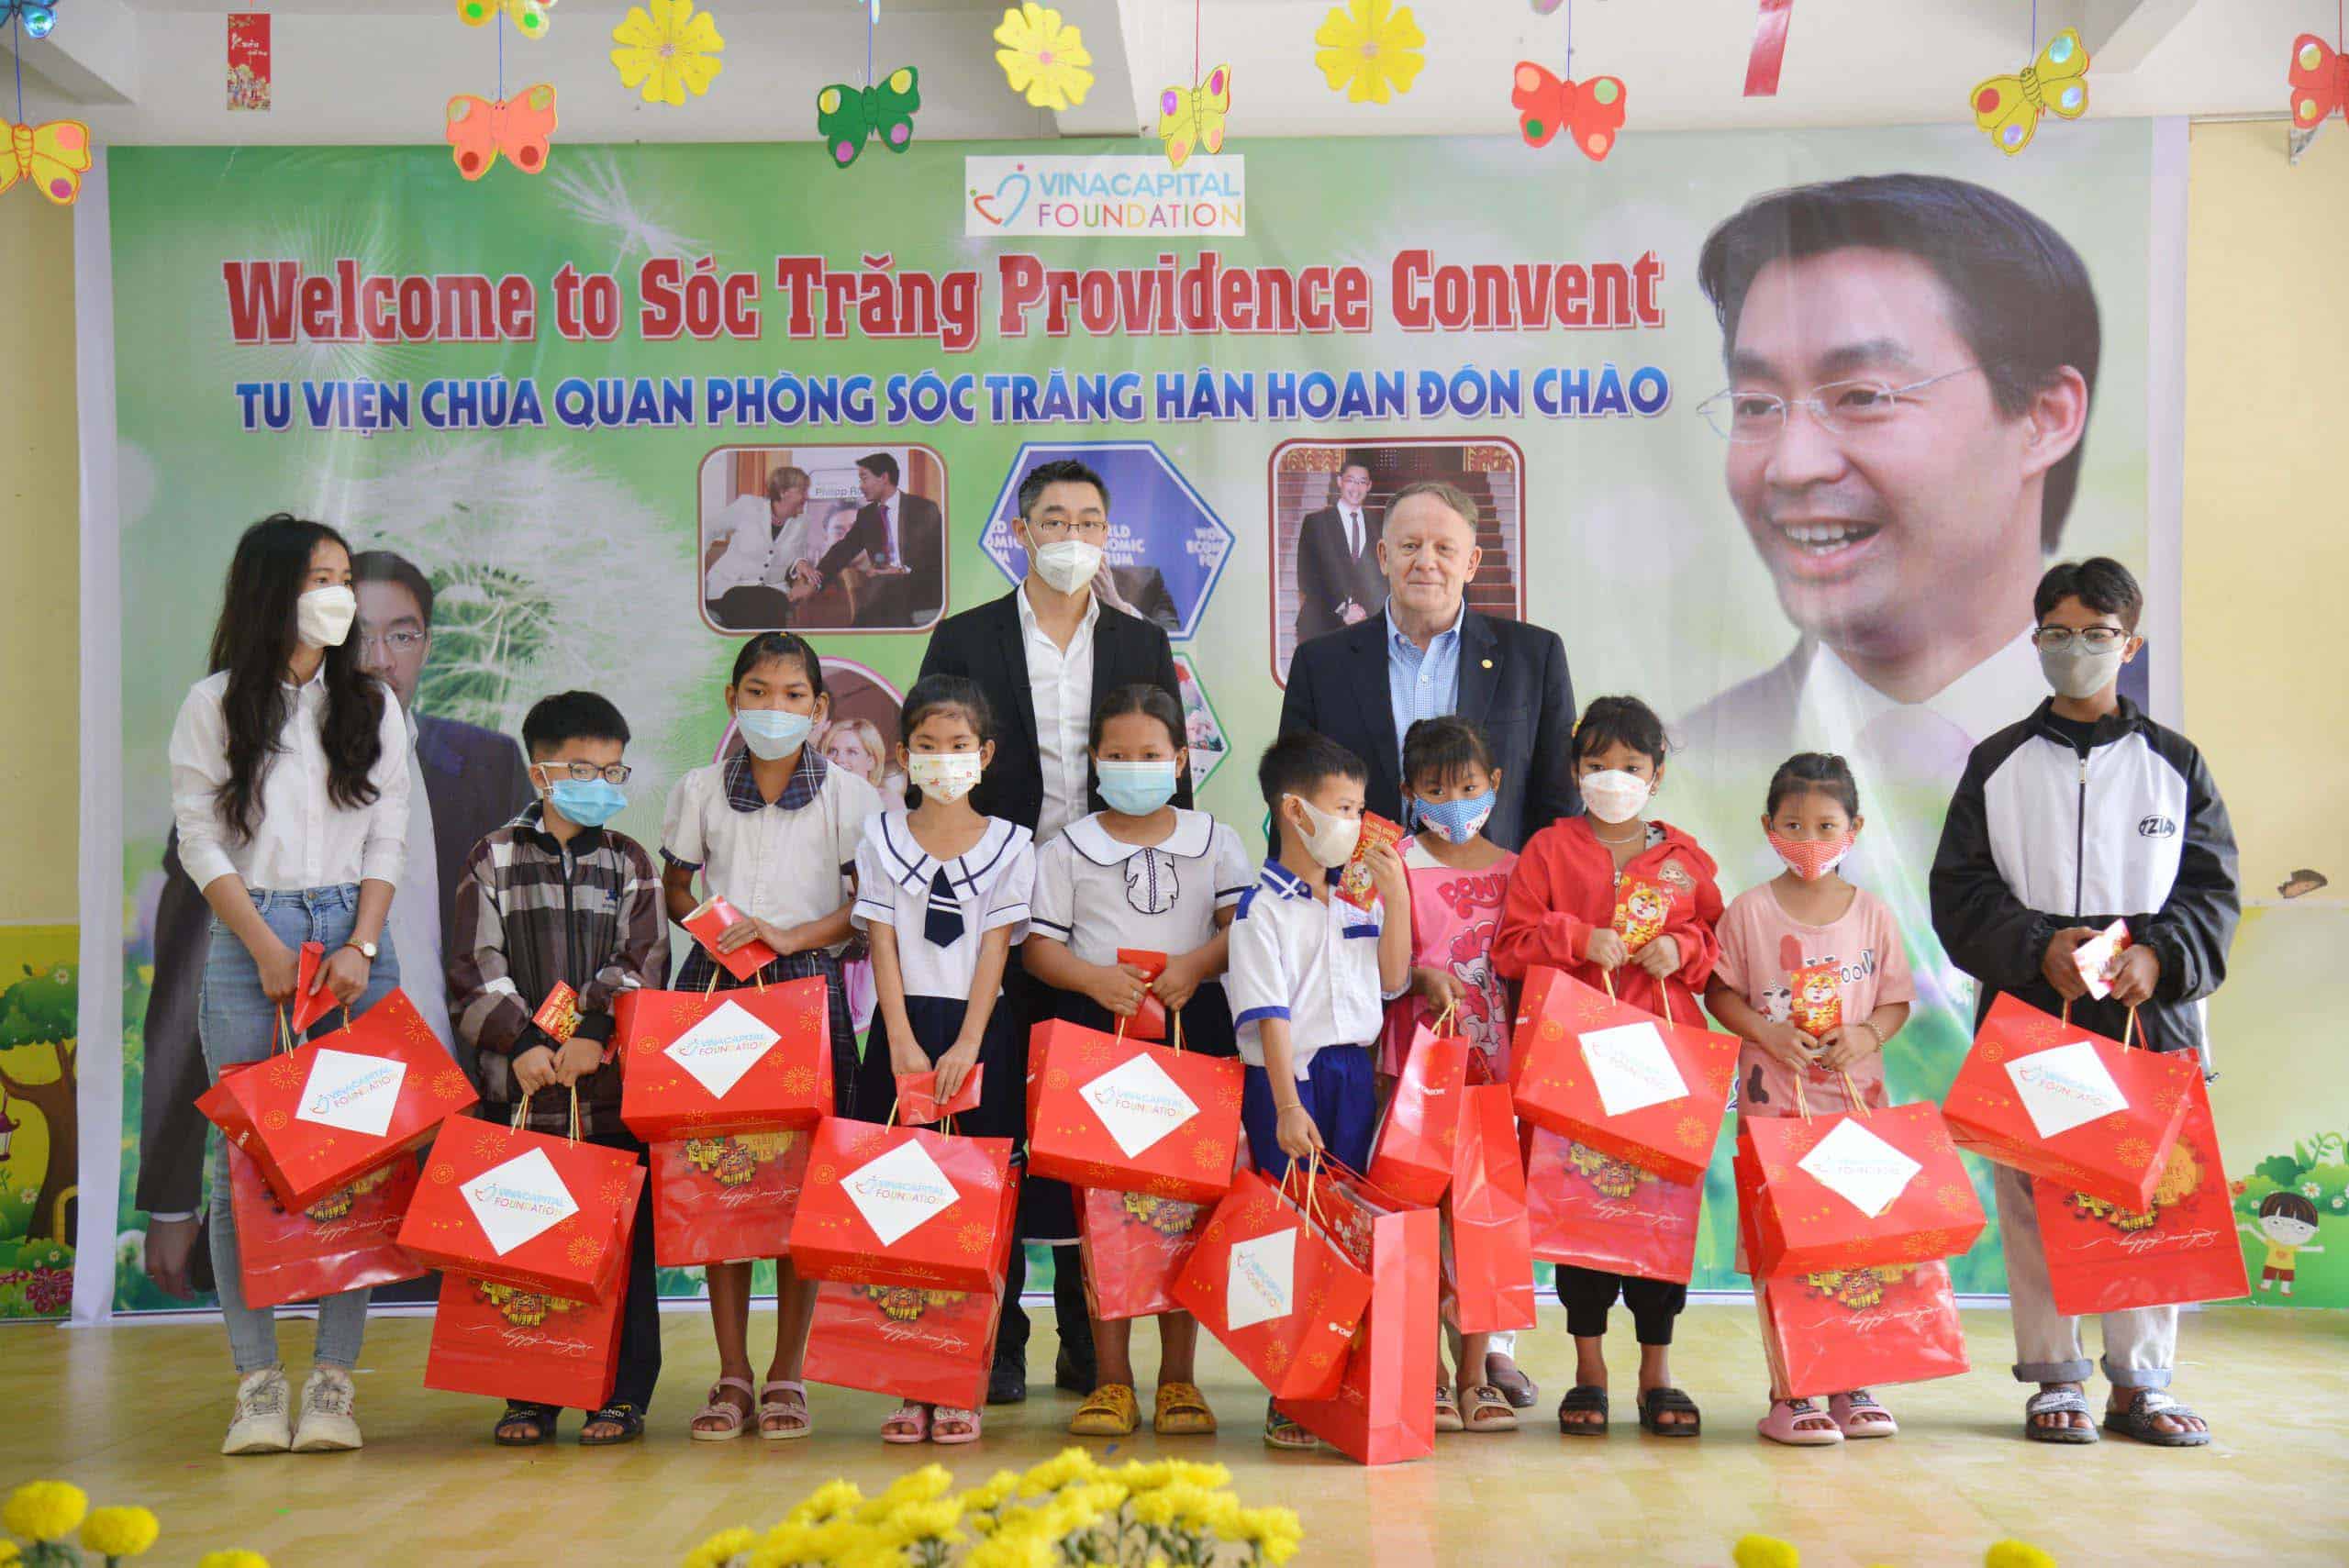 Dr. Philipp Rösler and VinaCapital Foundation visited and donated to an orphanage in Soc Trang province